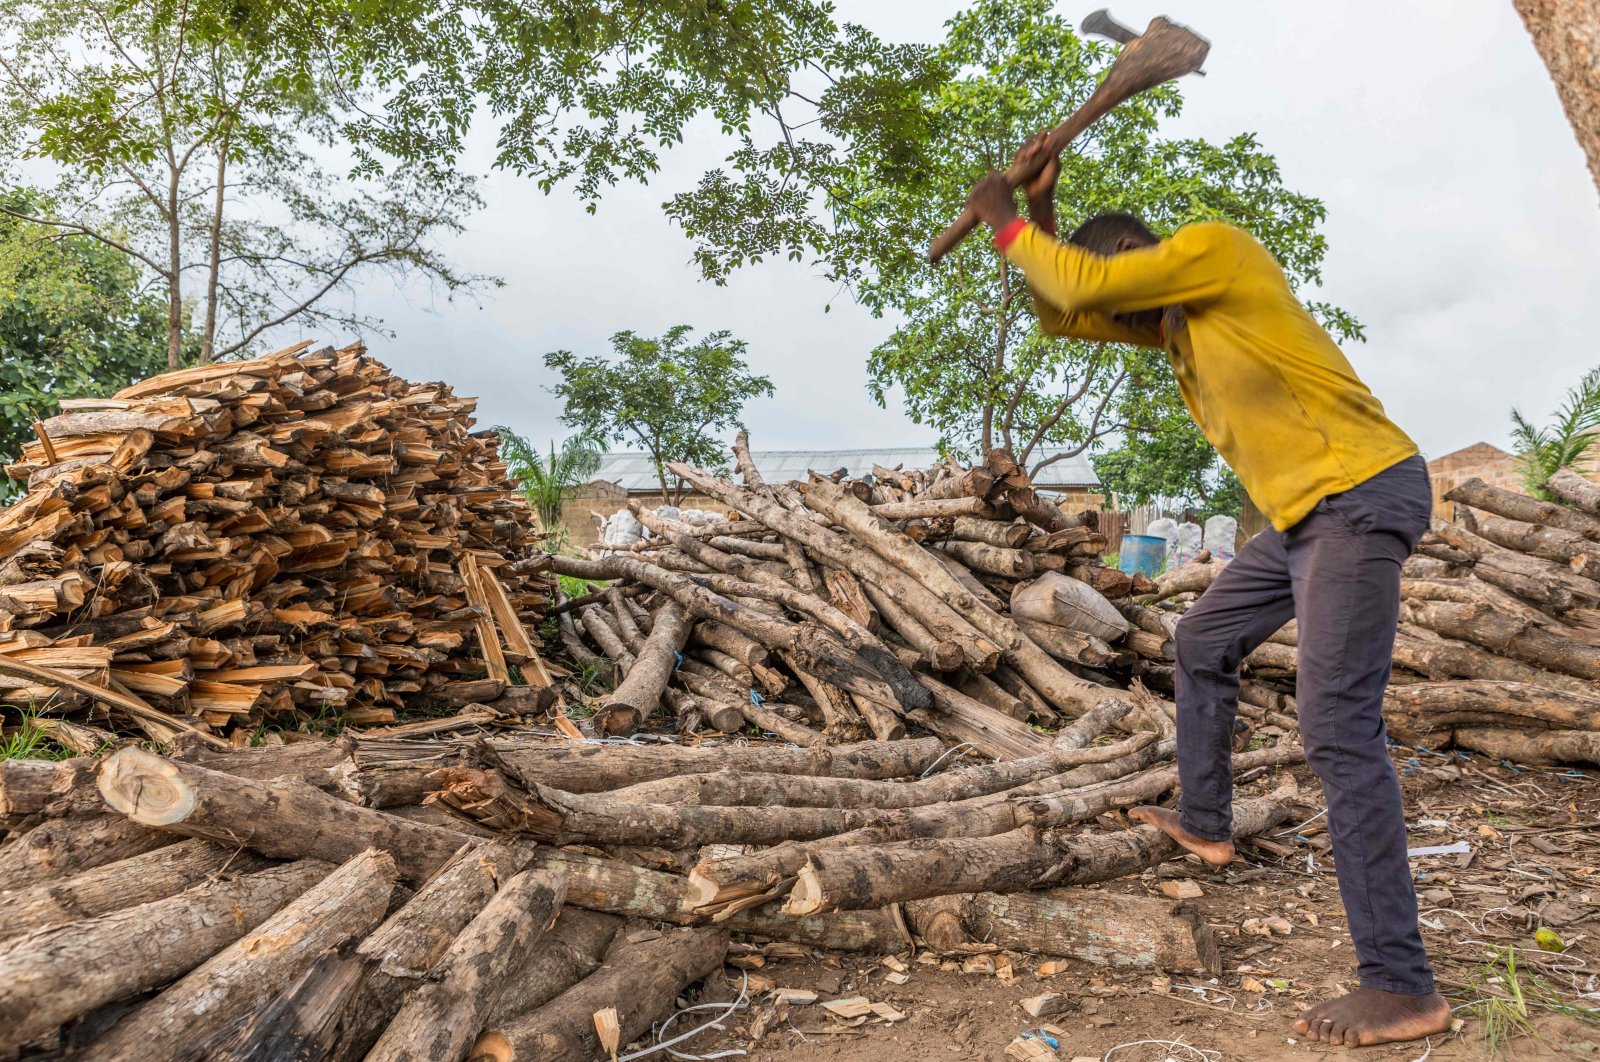 A man cuts wood to be sold in Zogbodomey, Benin, July 9, 2021. (AFP Photo)